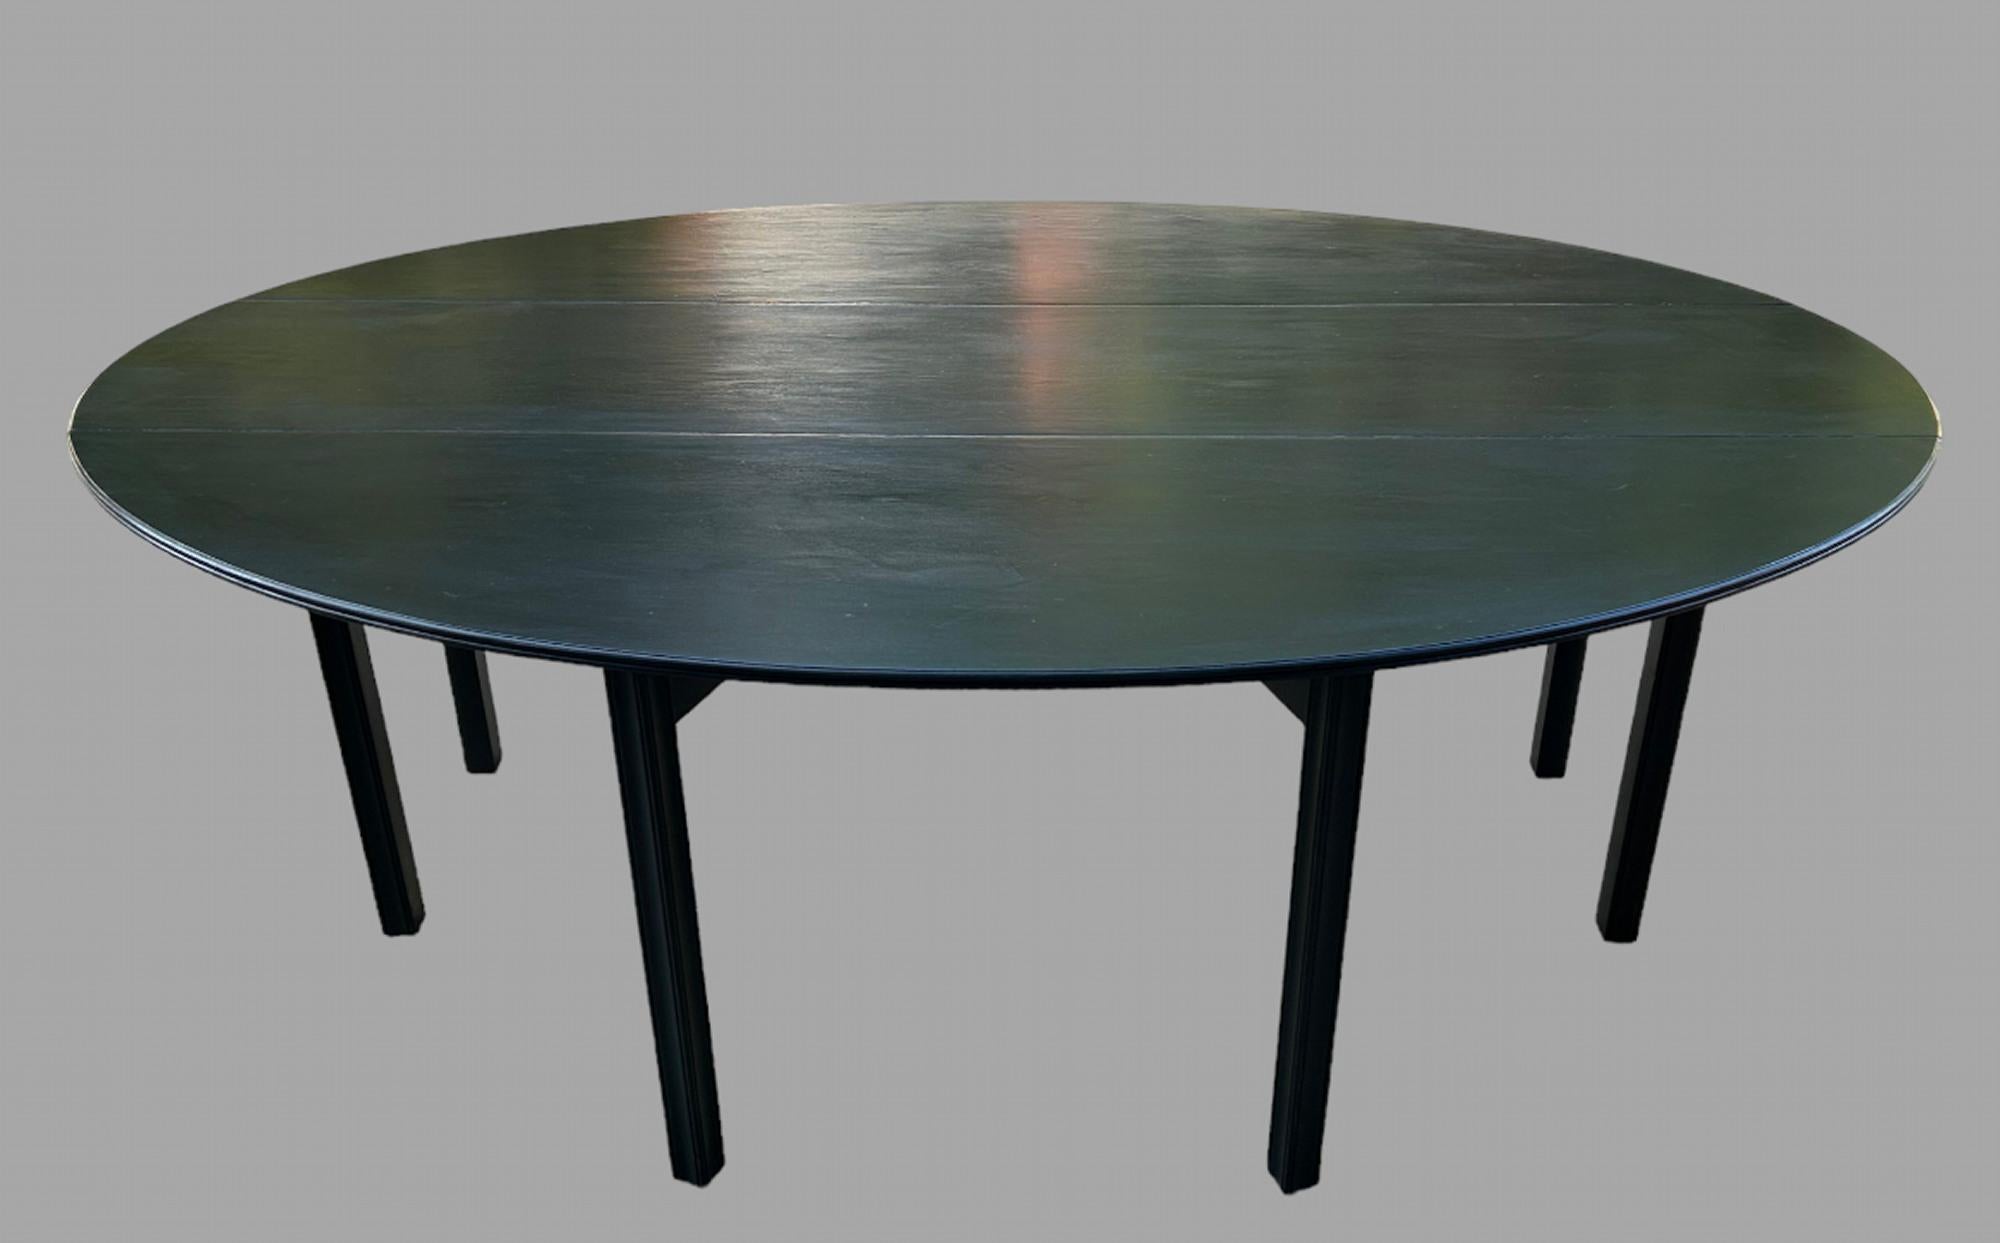 A Lovely Painted Oval Mahogany Gateleg Table in liberty black that would seat eight comfortably with very good knee height. Ideal as both sides fold down or you can just put one up.